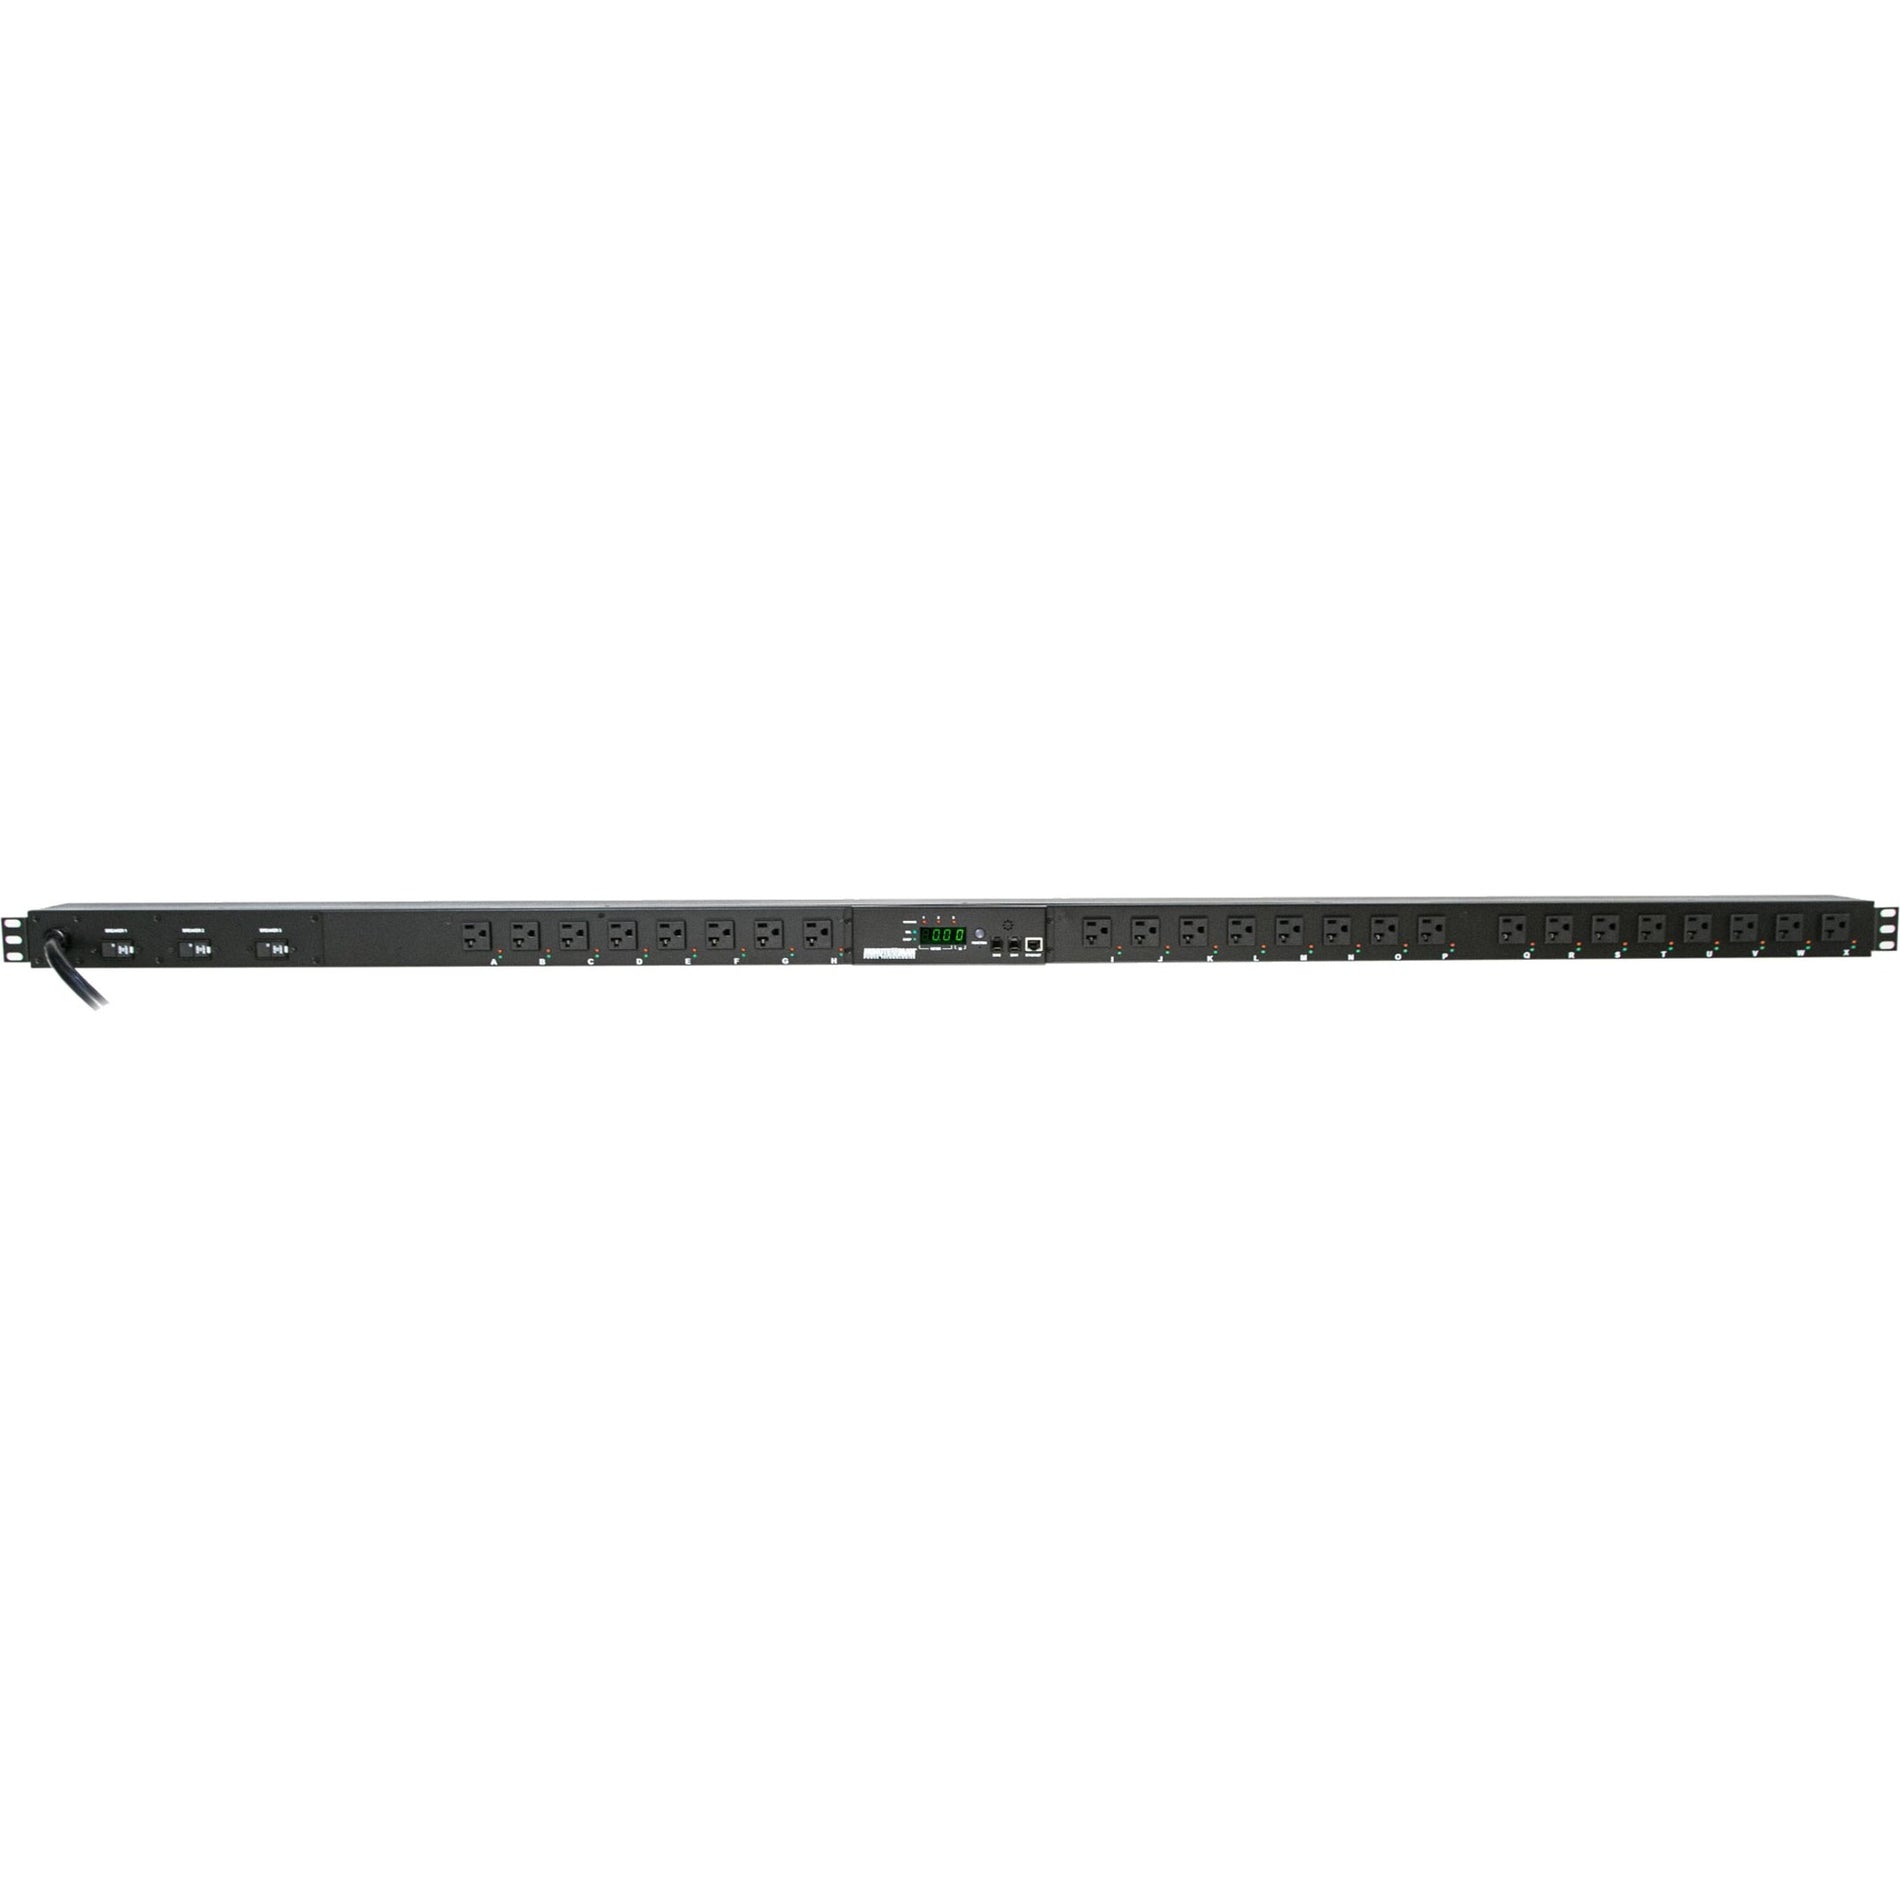 Minuteman RPM30241EV6 IP-Based Switched PDU 24-Outlet 30A L5-30P, Remote Power Management Switch